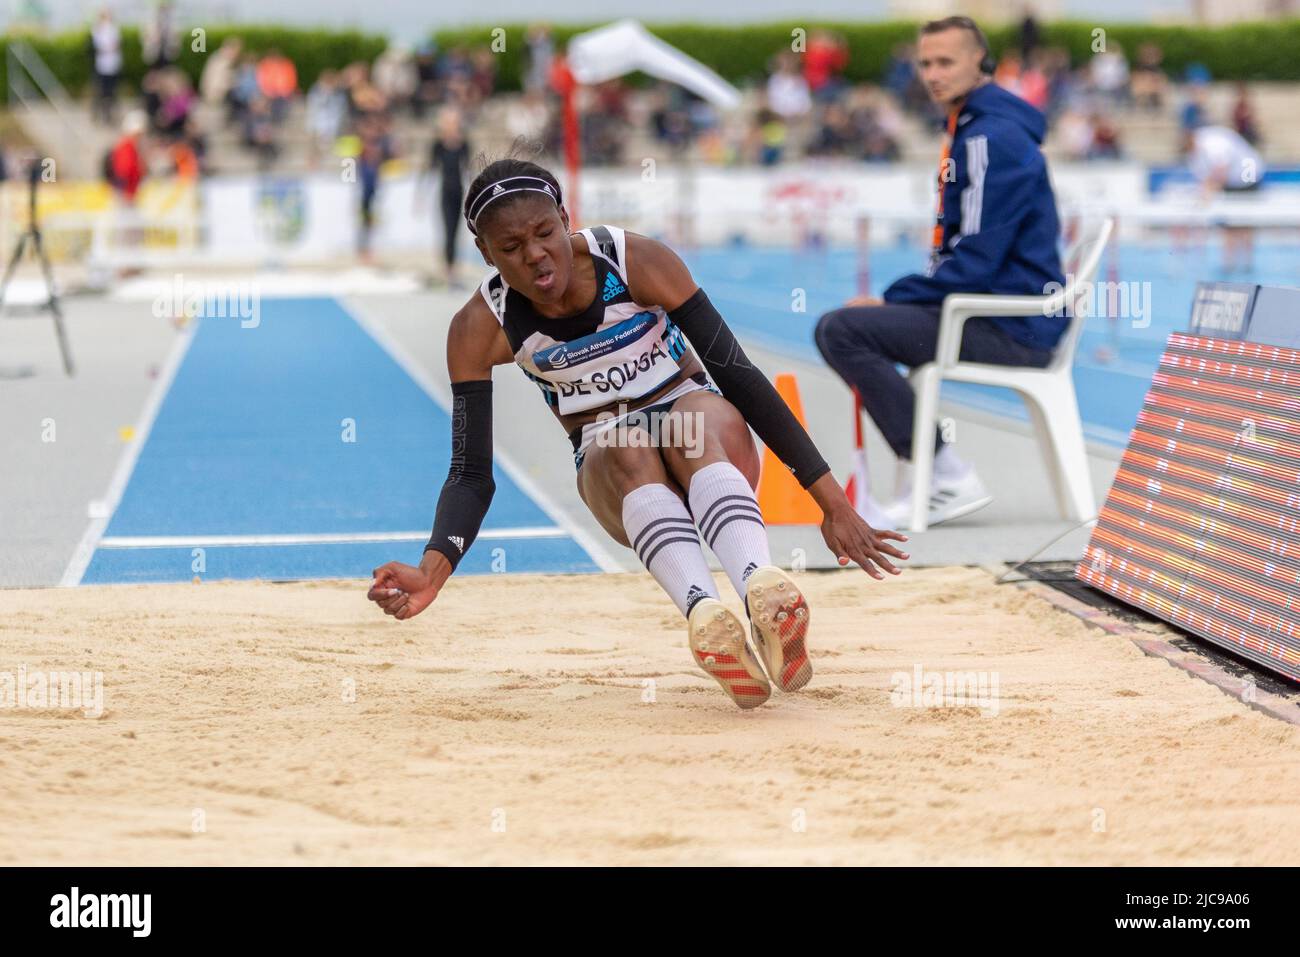 Long jumper Agate De Sousa of Saint Thomas competing at the P-T-S athletics meeting in the sports site of x-bionic sphere® in Šamorín, Slovakia, 9. June 2022 Stock Photo